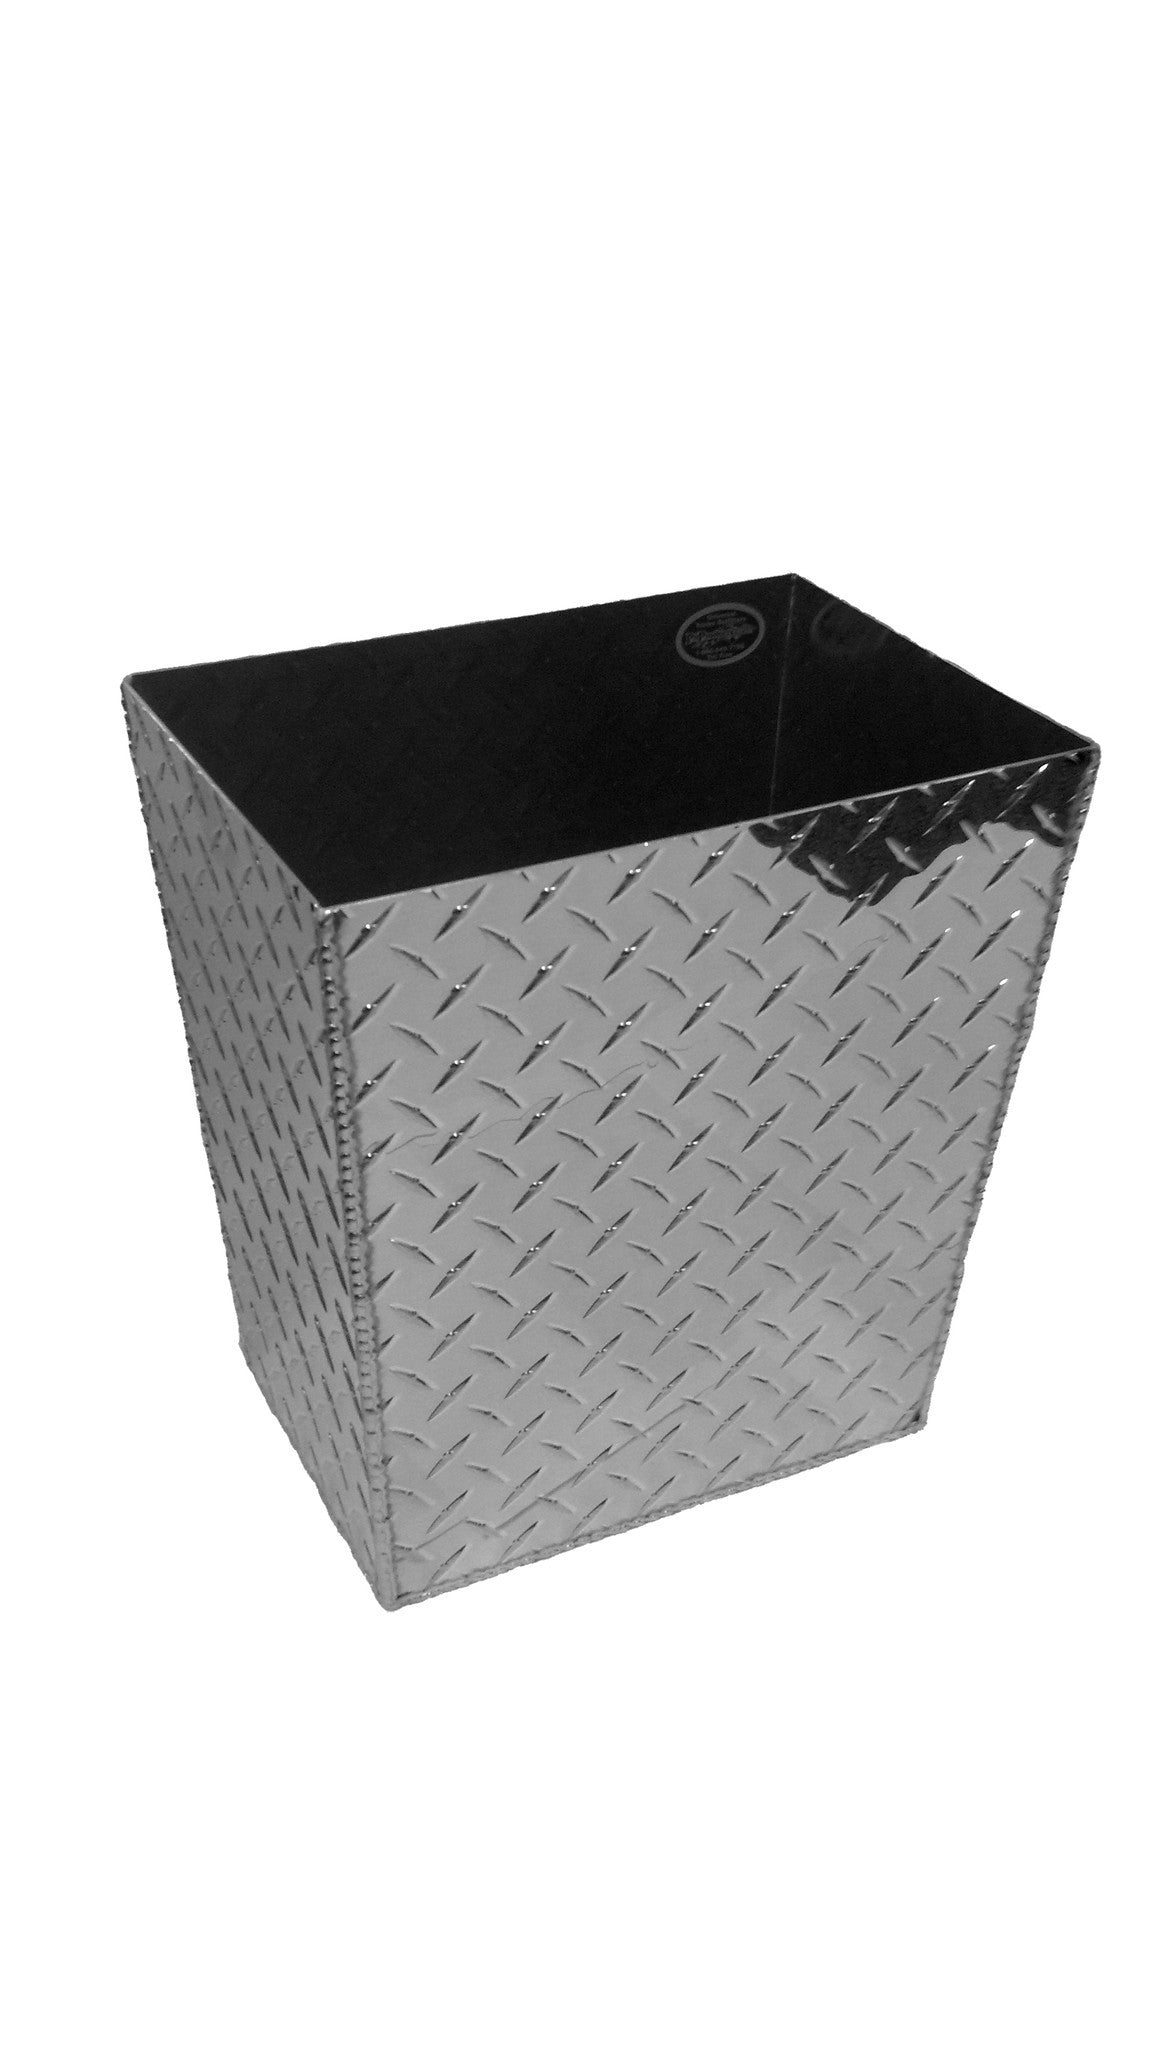 Find more Great Garbage Can For Garage Or Man Cave for sale at up to 90% off